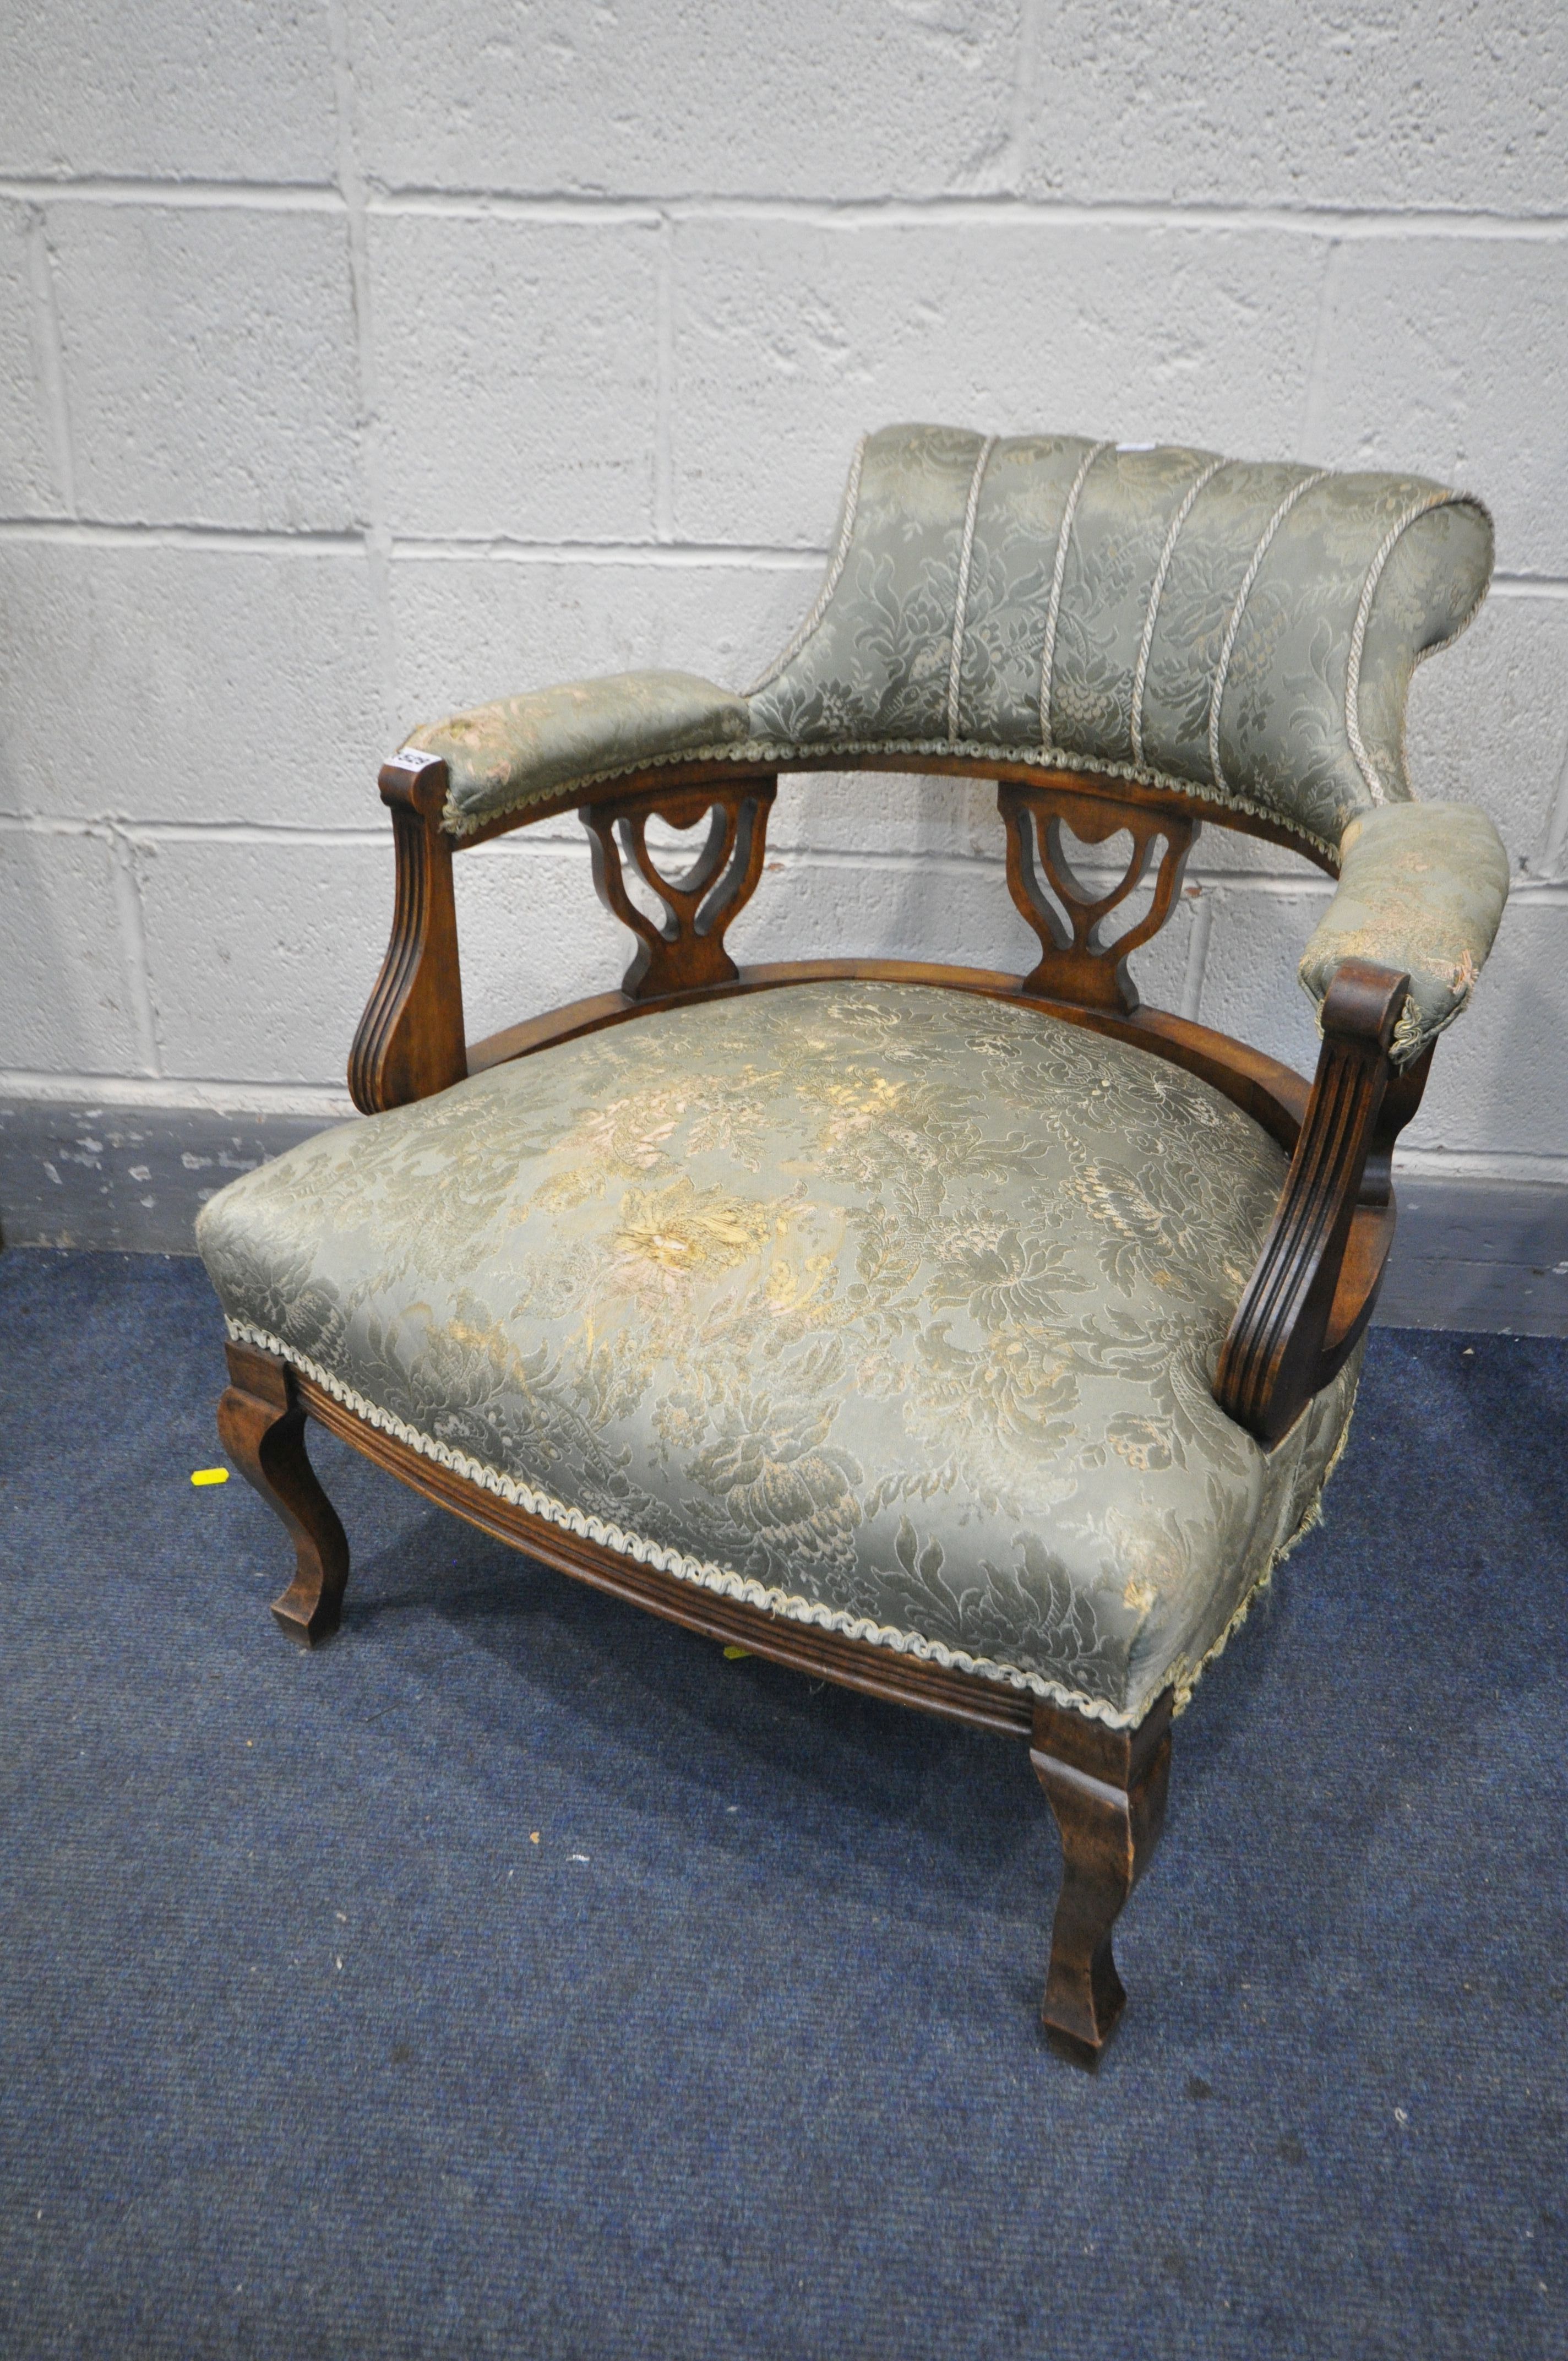 AN EDWARDIAN MAHOGANY TUB CHAIR, with scrolled back (condition - tears to both arms)